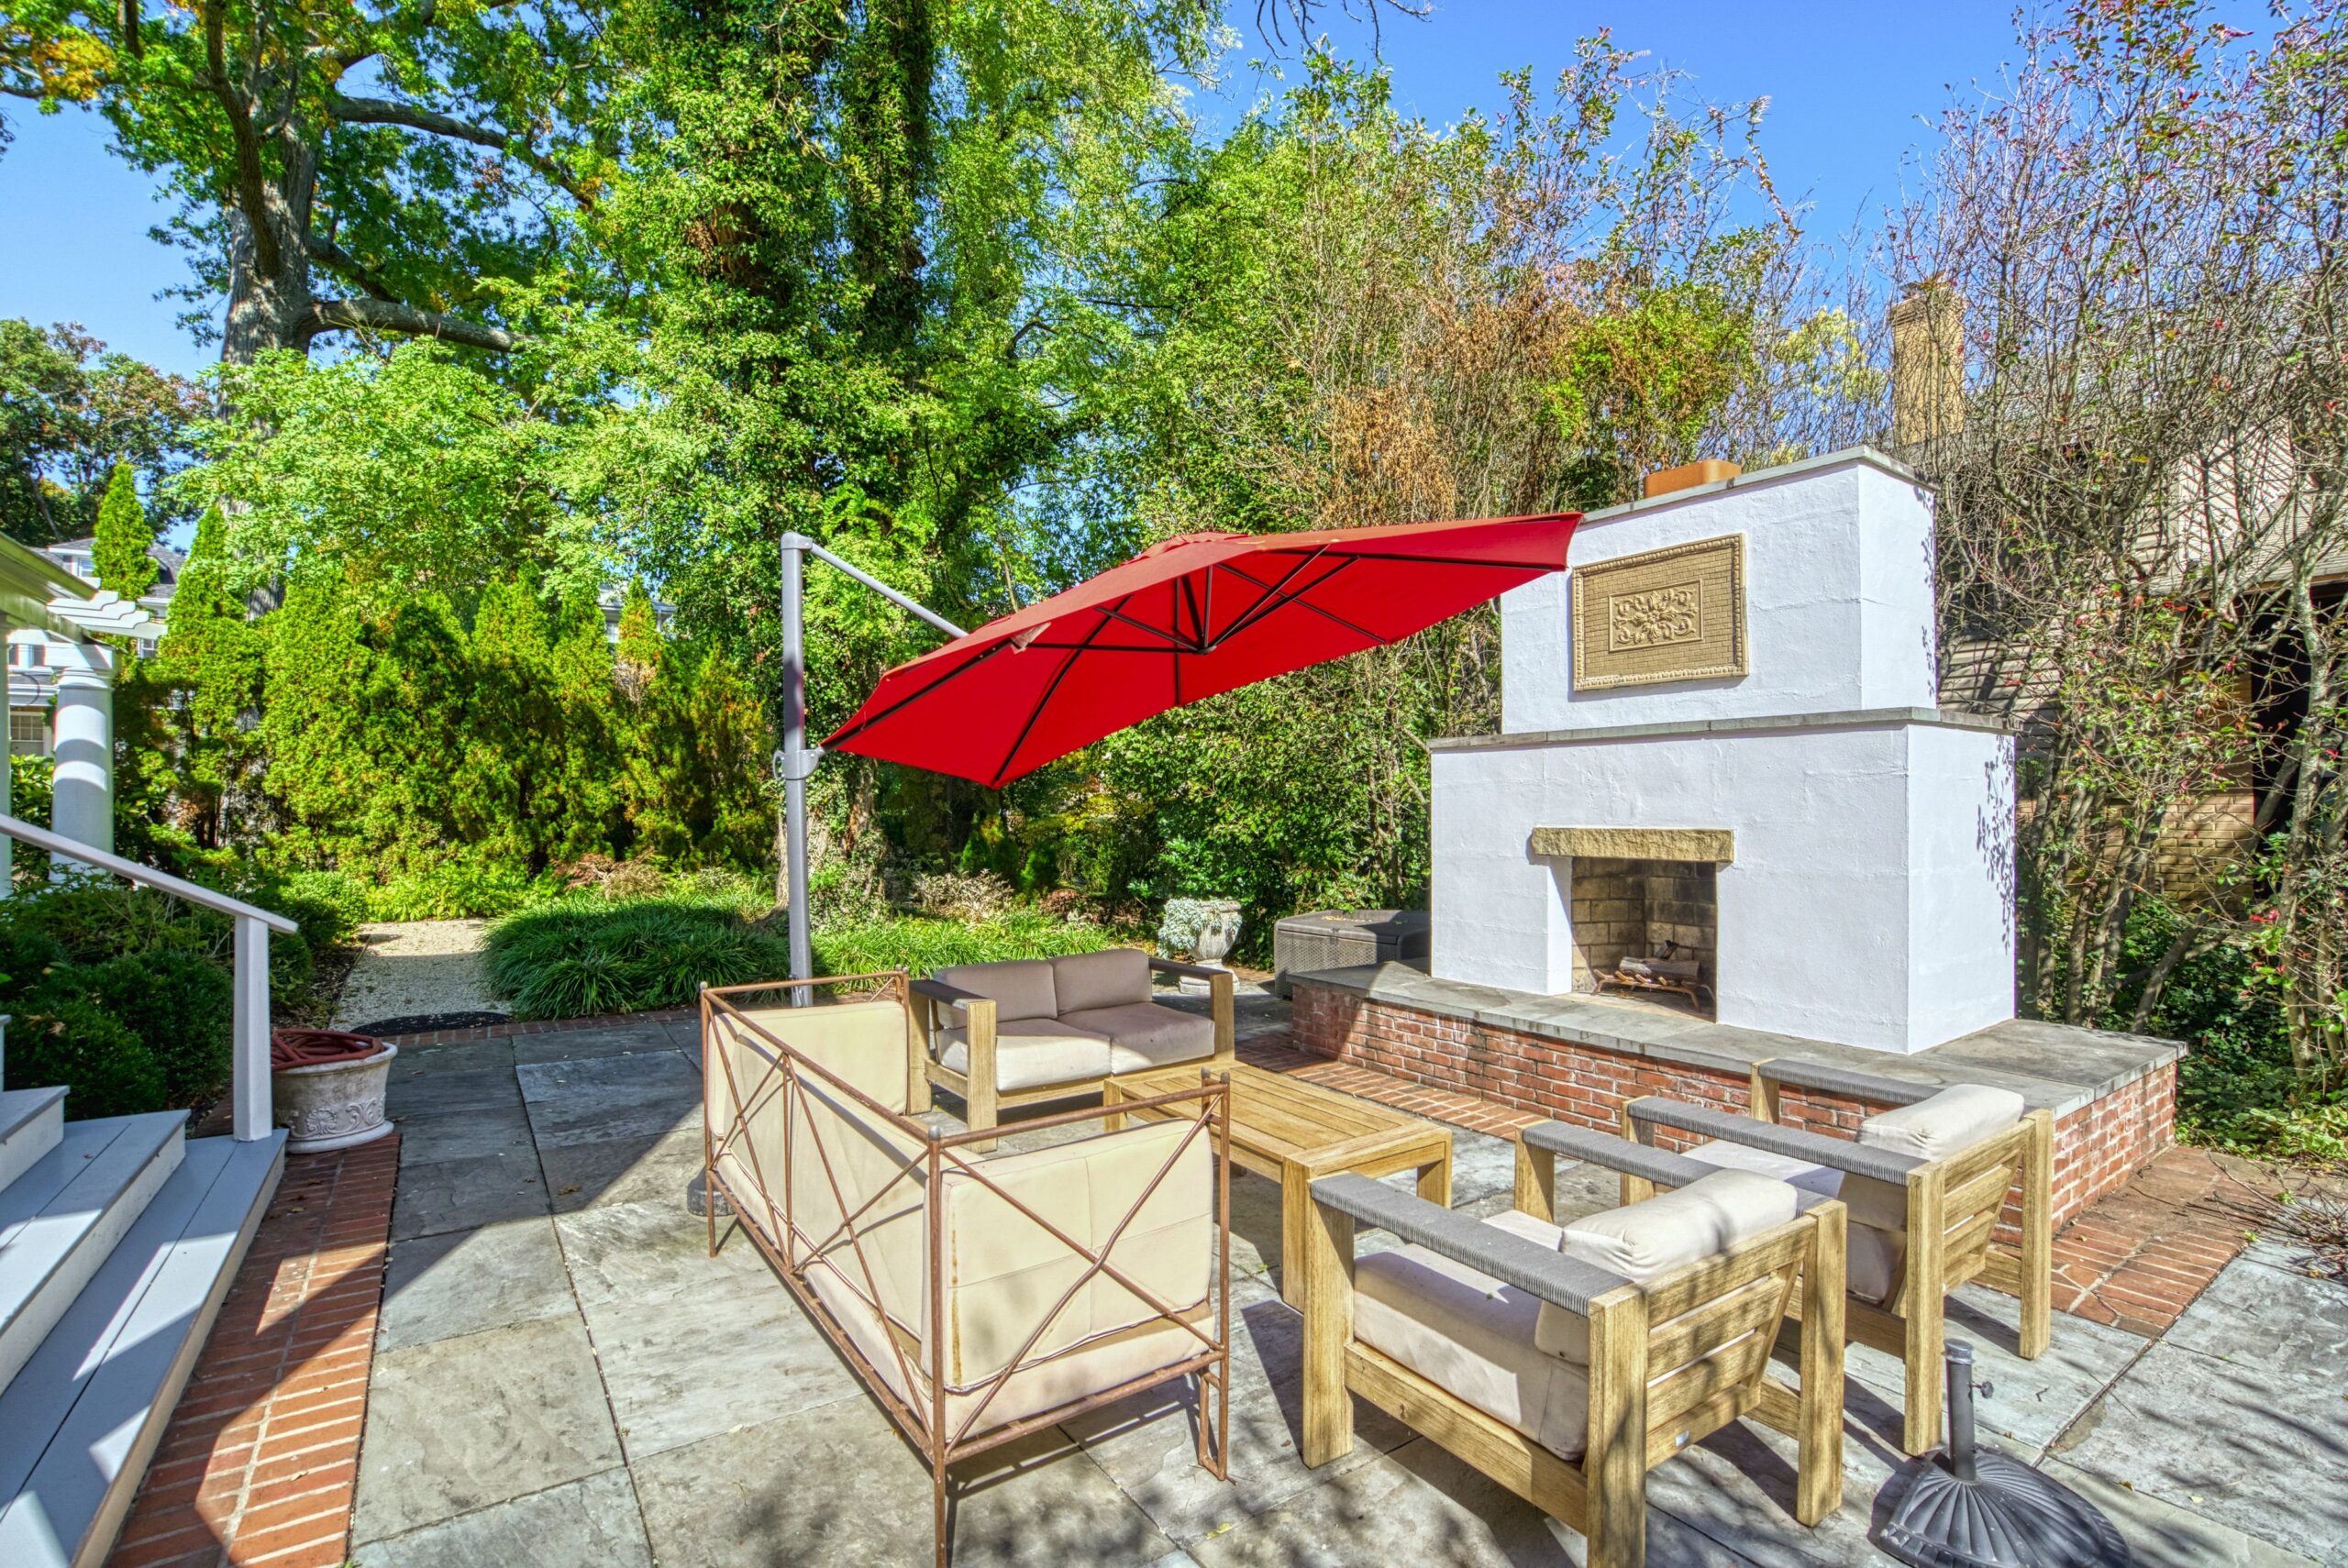 Exterior professional photo of 1826 Varnum St NW - showing the rear flagstone patio and large fireplace by patio furniture